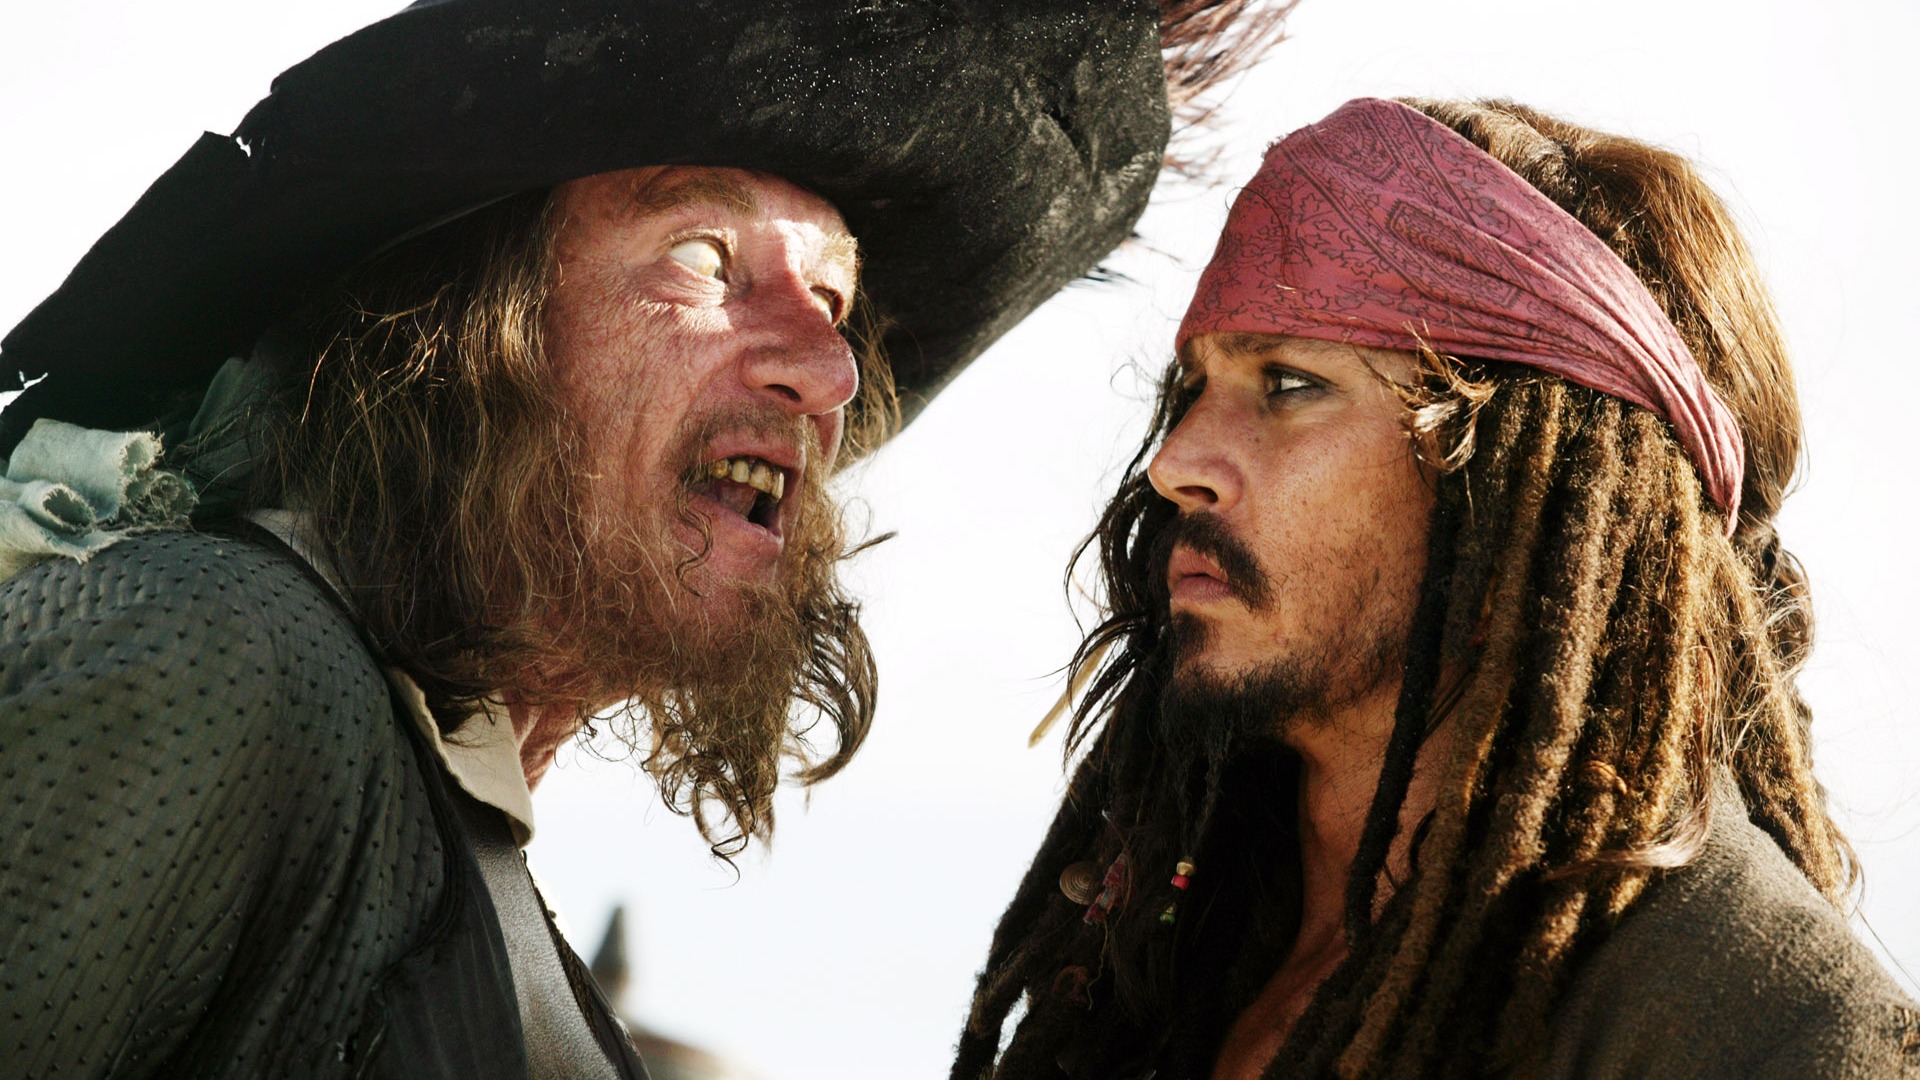 Pirates of the Caribbean 3 HD Wallpapers #24 - 1920x1080